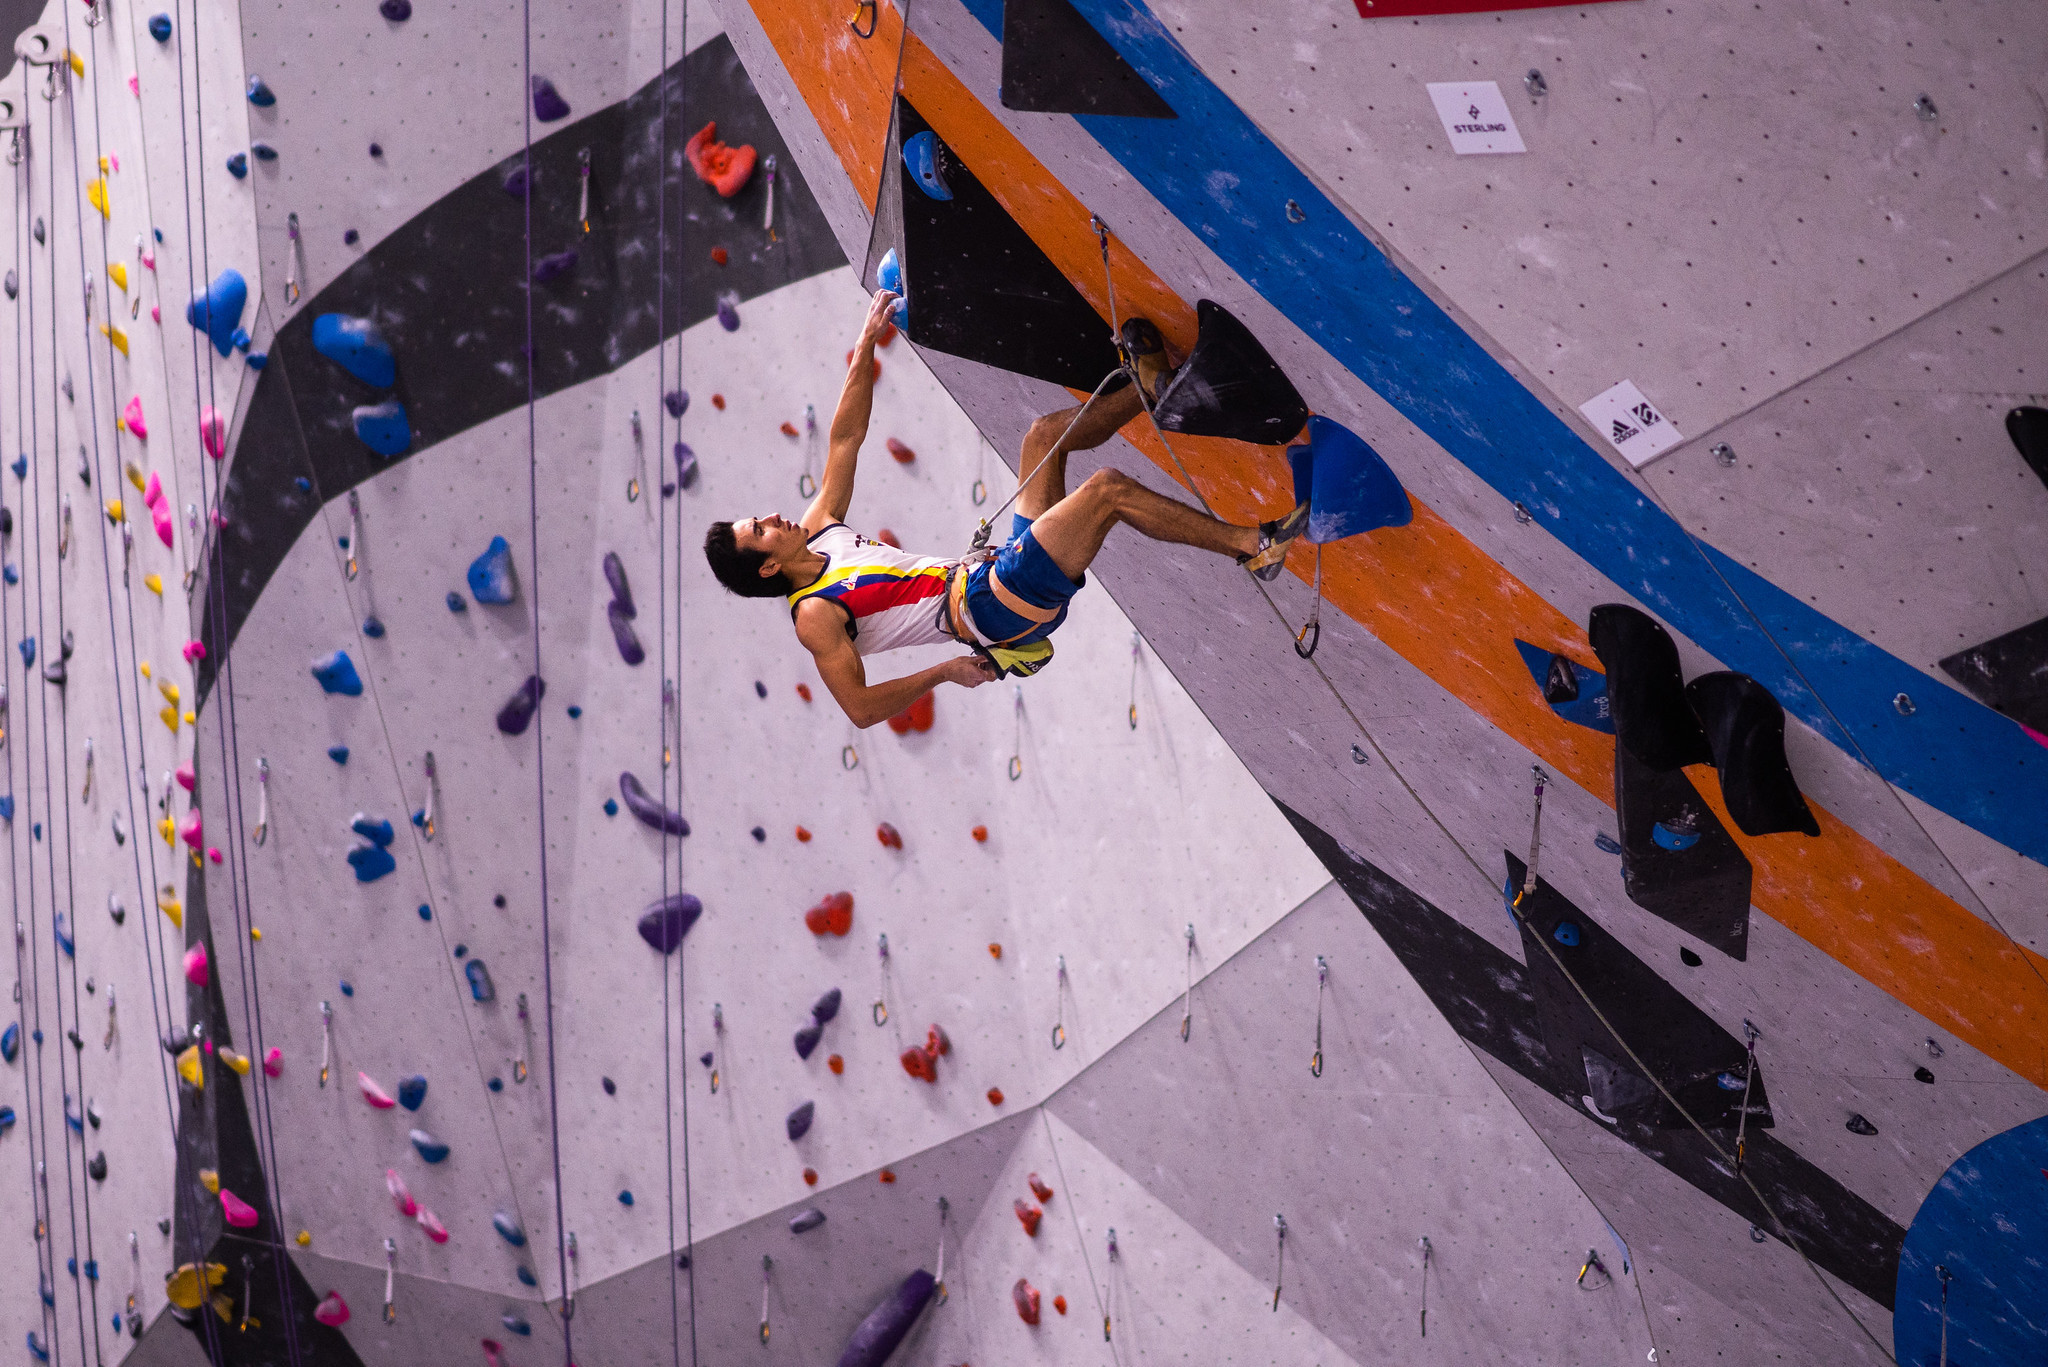 The IFSC hopes the updated rules will allow for the next step to be taken as the sport aims to resume ©IFSC 